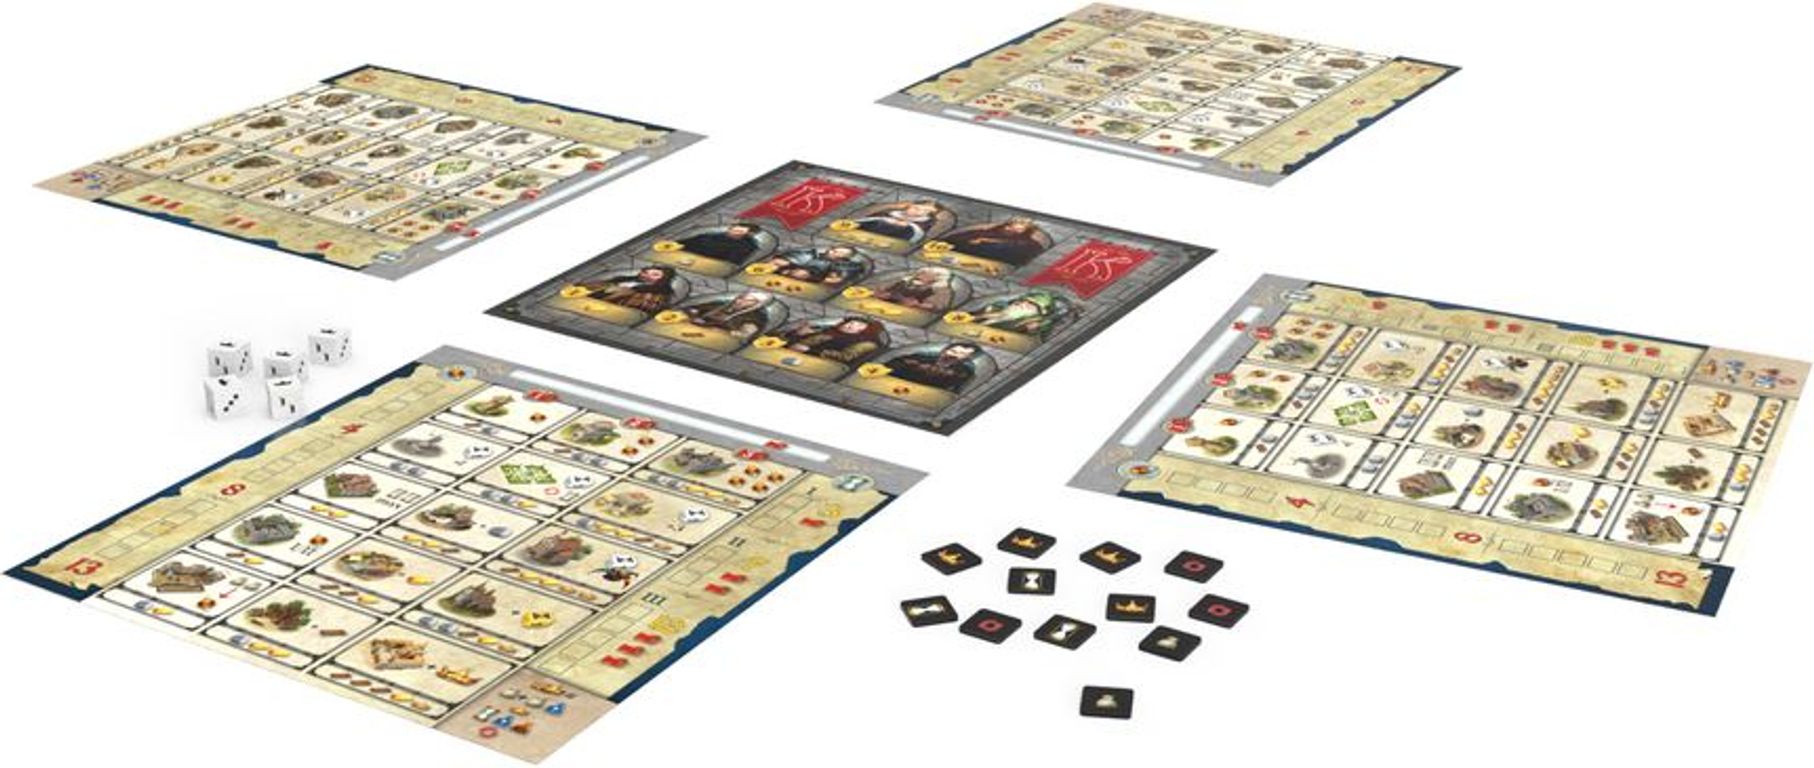 Kingsburg: The Dice Game components